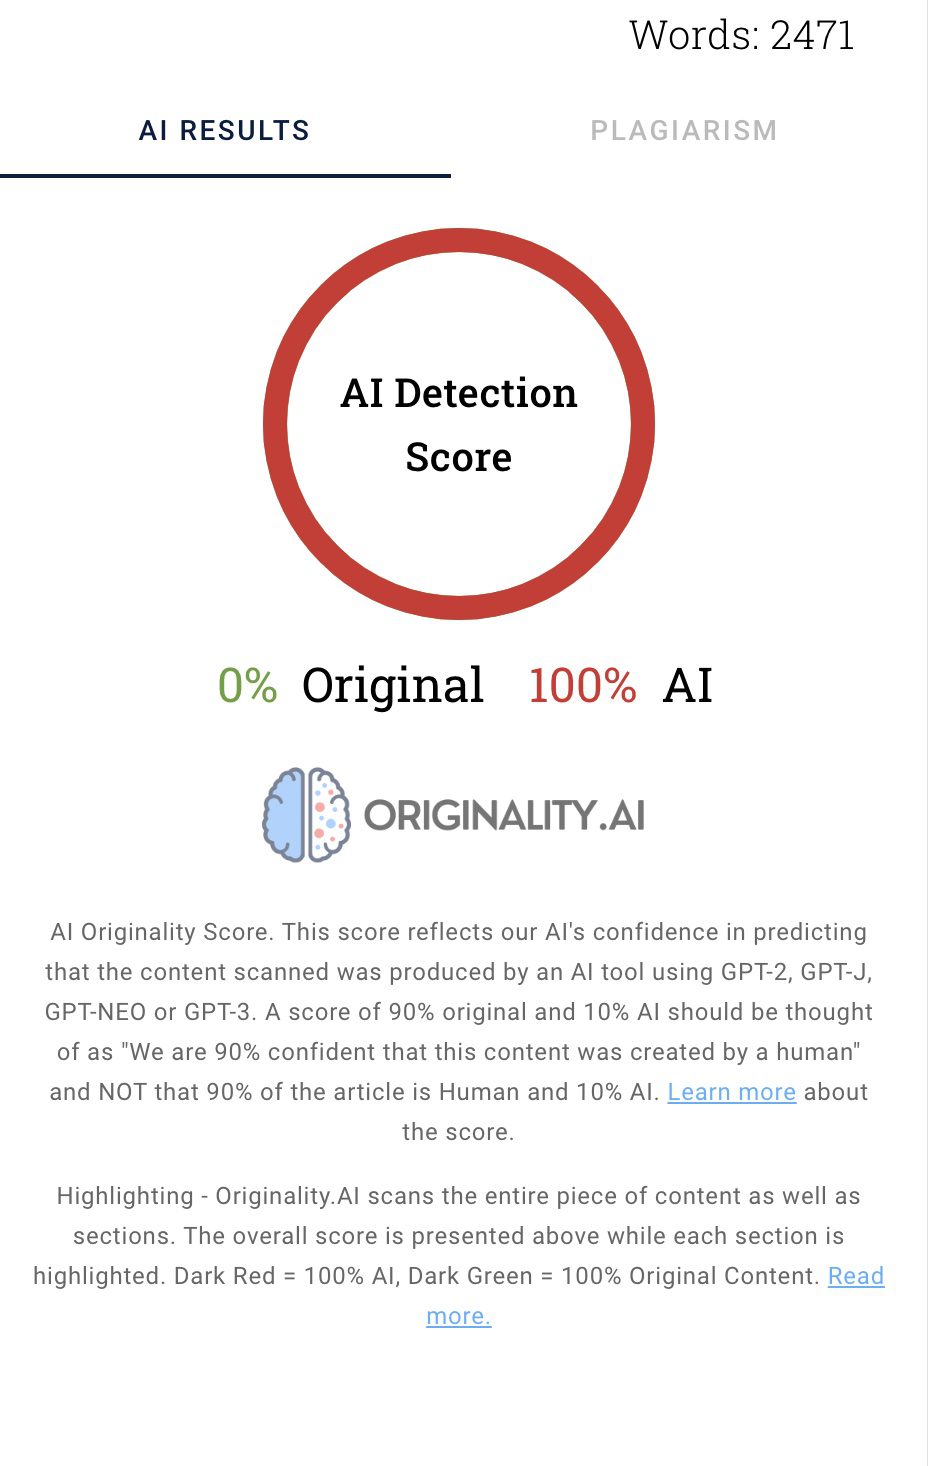 originality.ai shows 100% ai content as part of it's ai content dector tool